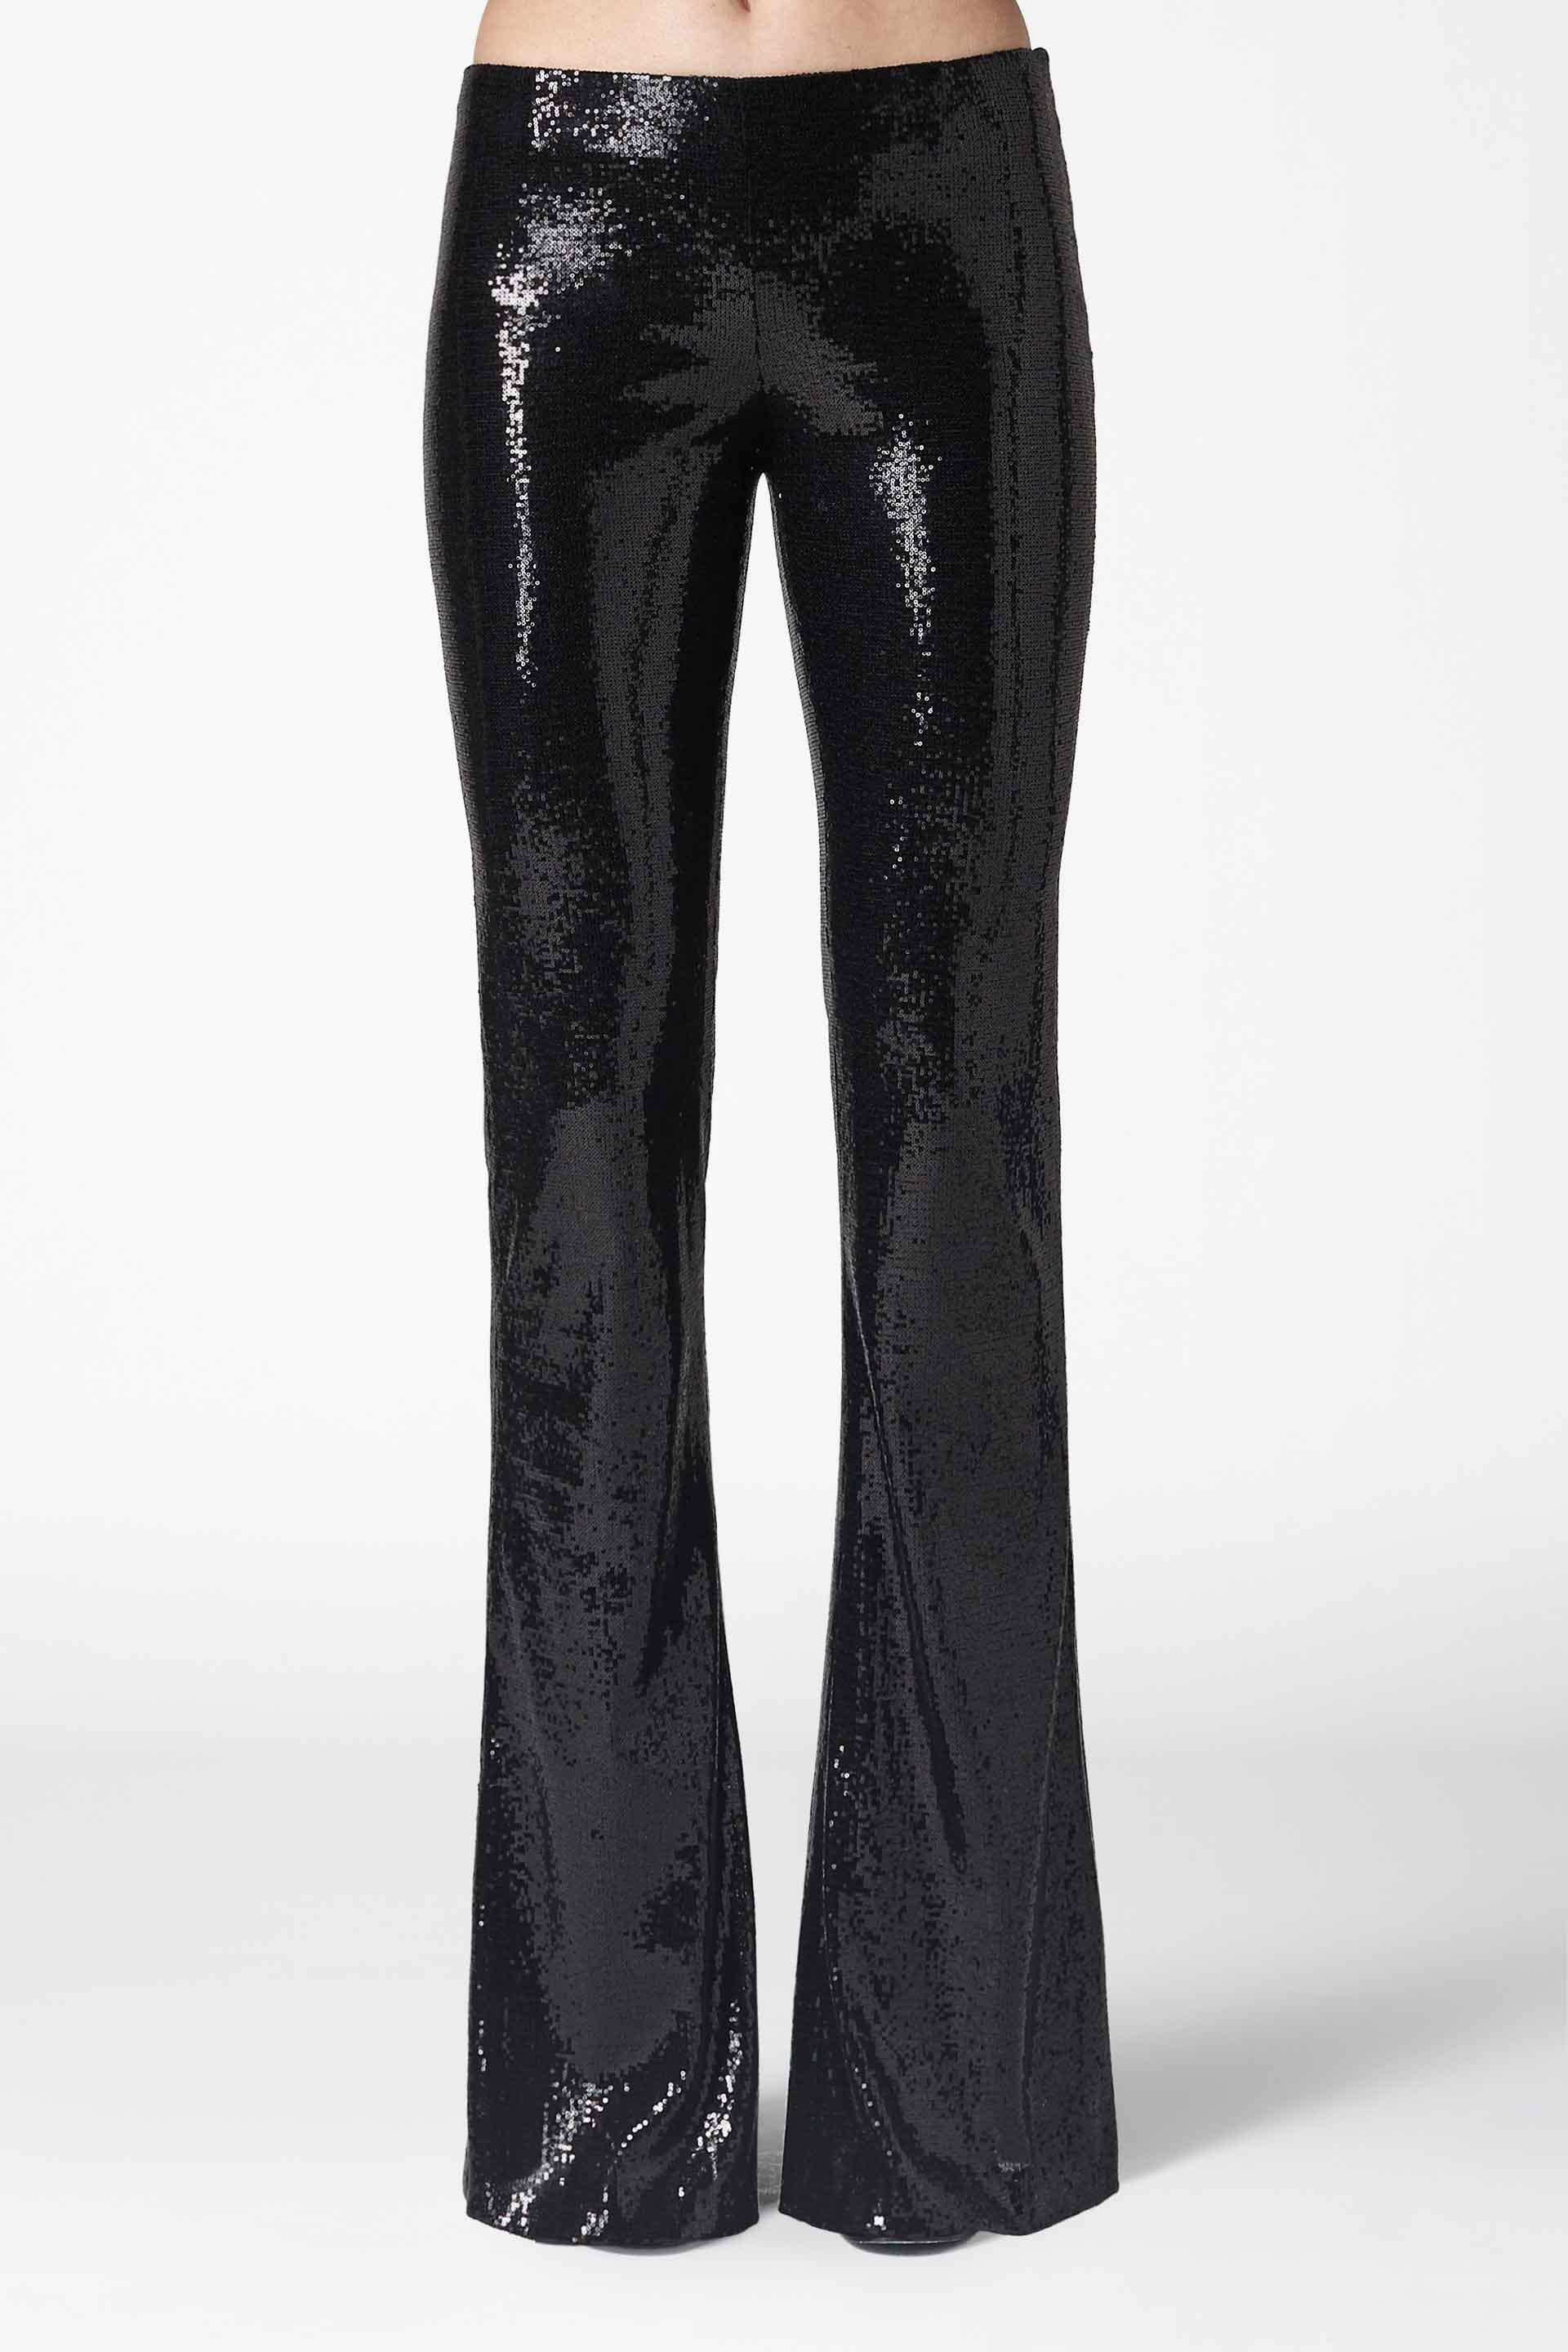 Galvan London Satin Galaxy Flared Sequin Trousers in Black - Lyst